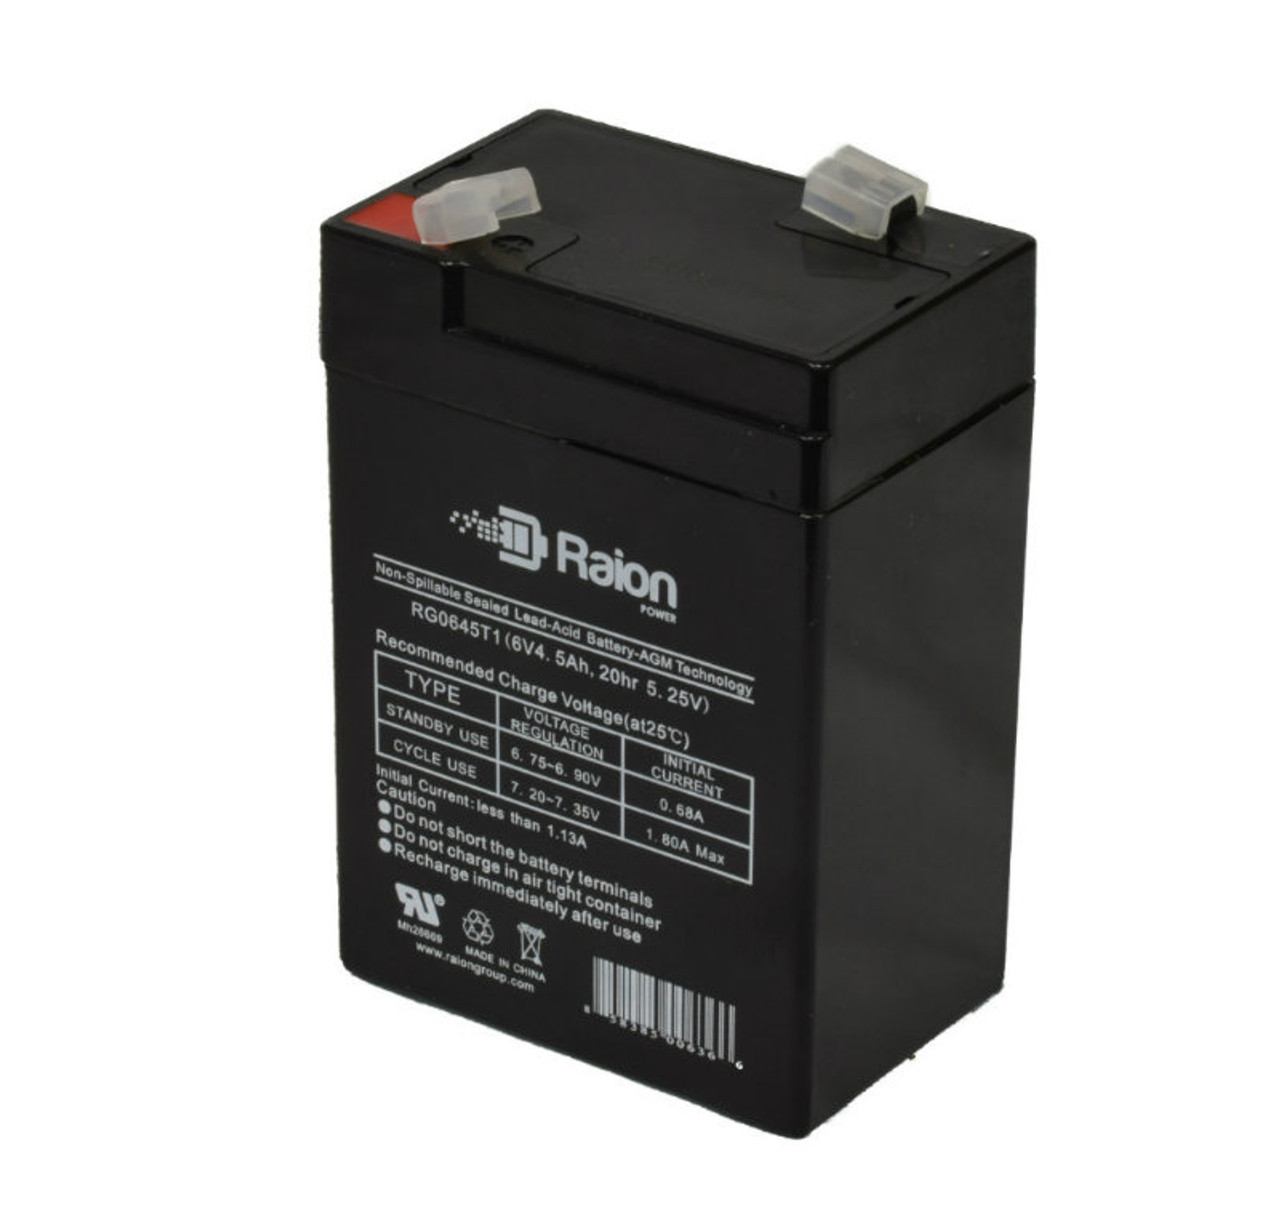 Raion Power RG0645T1 6V 4.5Ah Replacement Battery Cartridge for TLV645